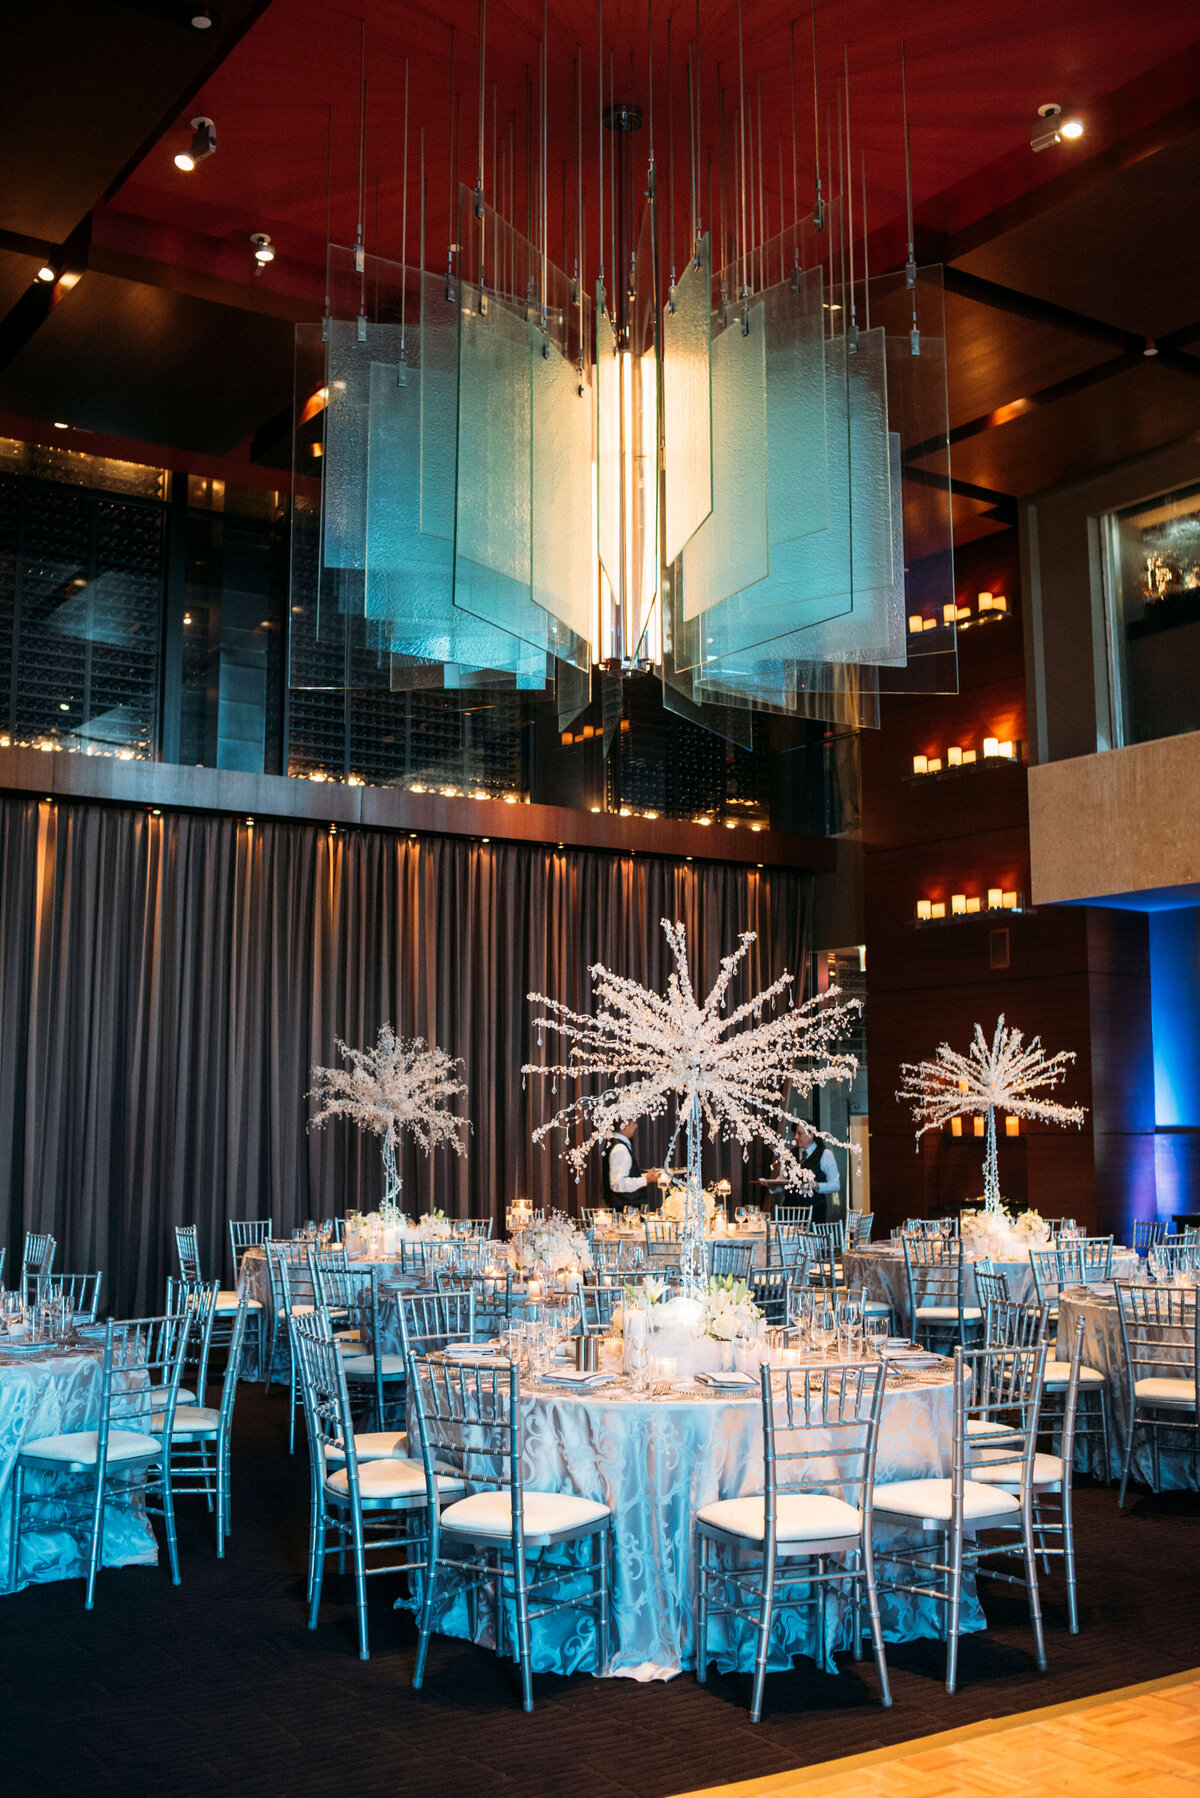 Elegant wedding reception in a hall with dinner tables, chairs and grand chandeliers